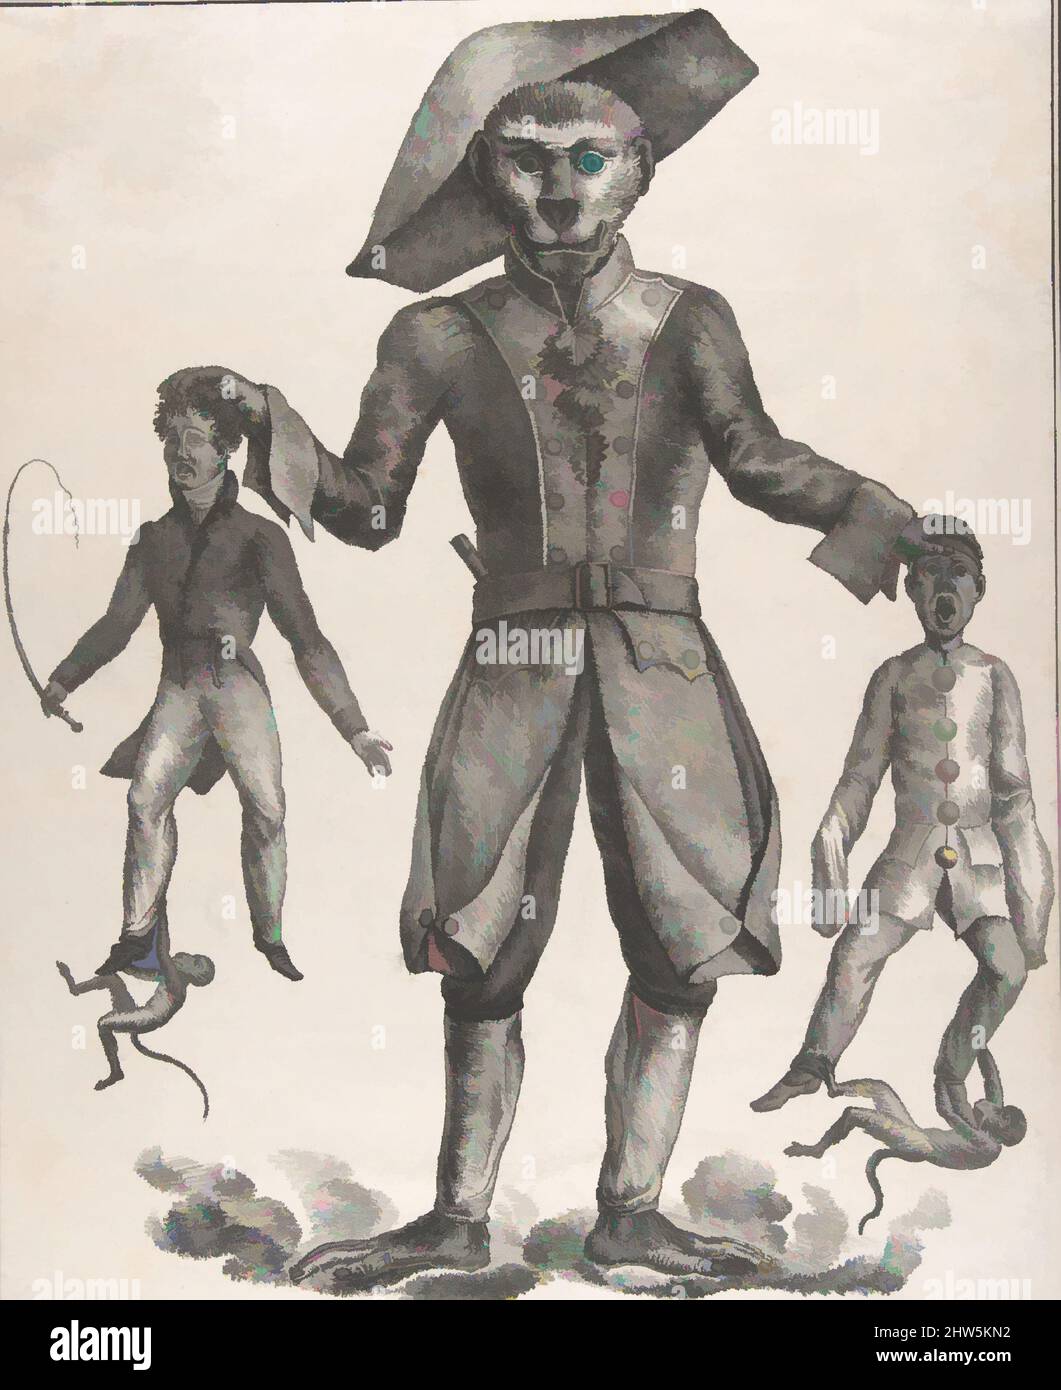 Art inspired by A Giant Monkey in Uniform Holding up Pierrot and a Man with a Whip, after 1825, Lithograph touched with pen and brown ink and graphite, sheet: 21 7/8 x 17 in. (55.5 x 43.2 cm), Prints, Anonymous, French, Austrian or German, second decade19th century, Classic works modernized by Artotop with a splash of modernity. Shapes, color and value, eye-catching visual impact on art. Emotions through freedom of artworks in a contemporary way. A timeless message pursuing a wildly creative new direction. Artists turning to the digital medium and creating the Artotop NFT Stock Photo